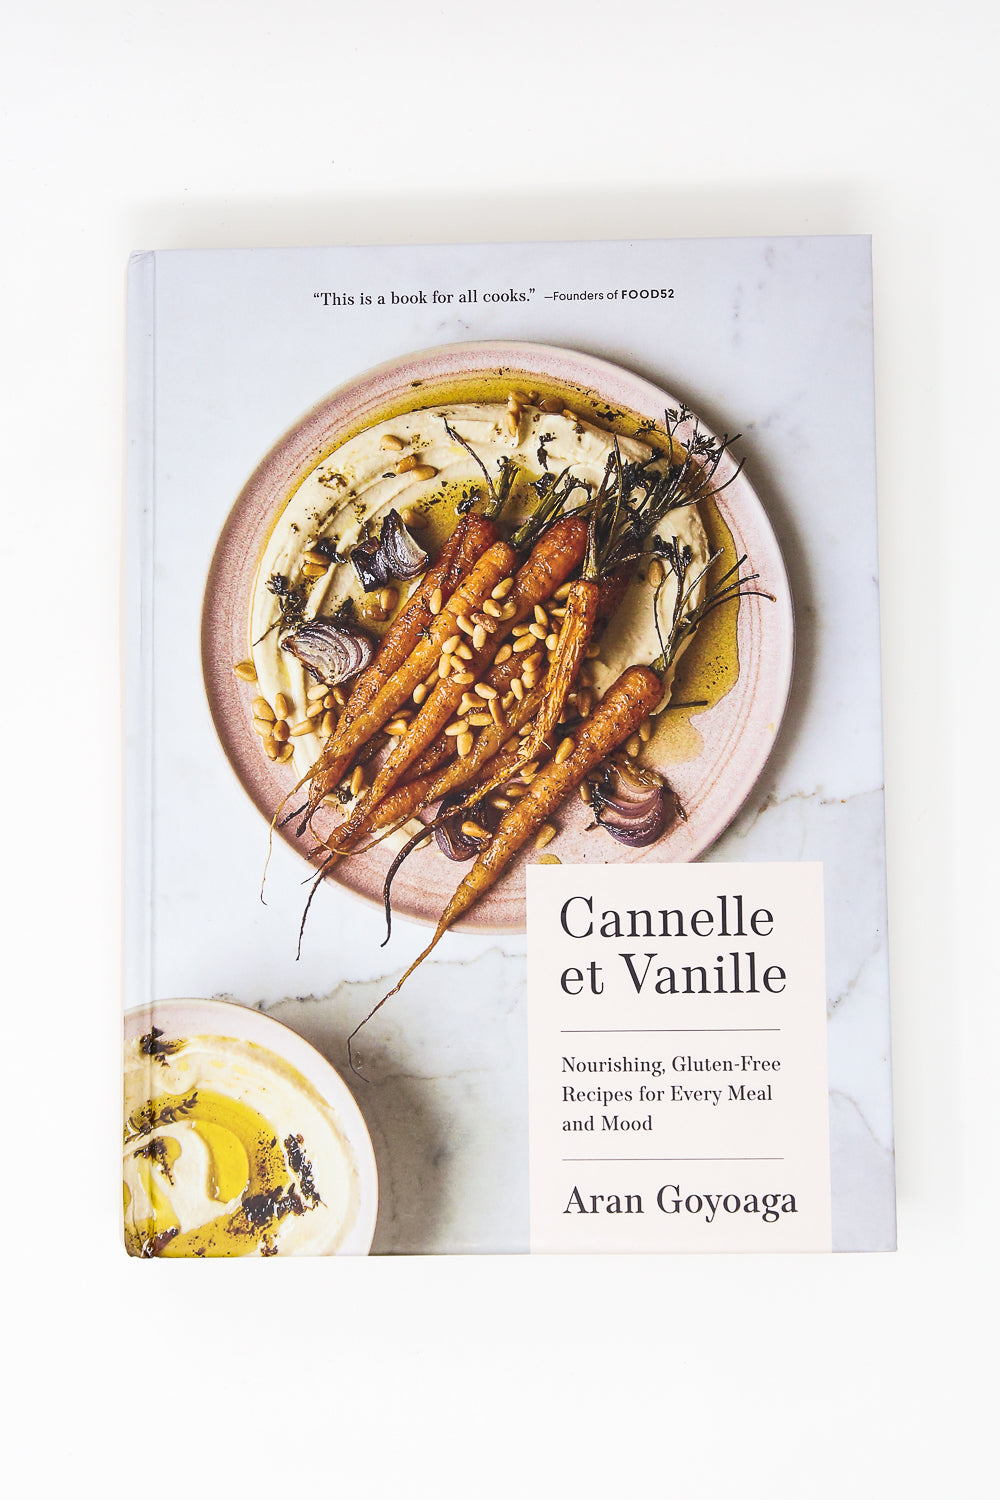 Aran Goyoaga Cannelle et Vanille – Nourishing, Gluten-Free Recipes for Every Meal and Mood